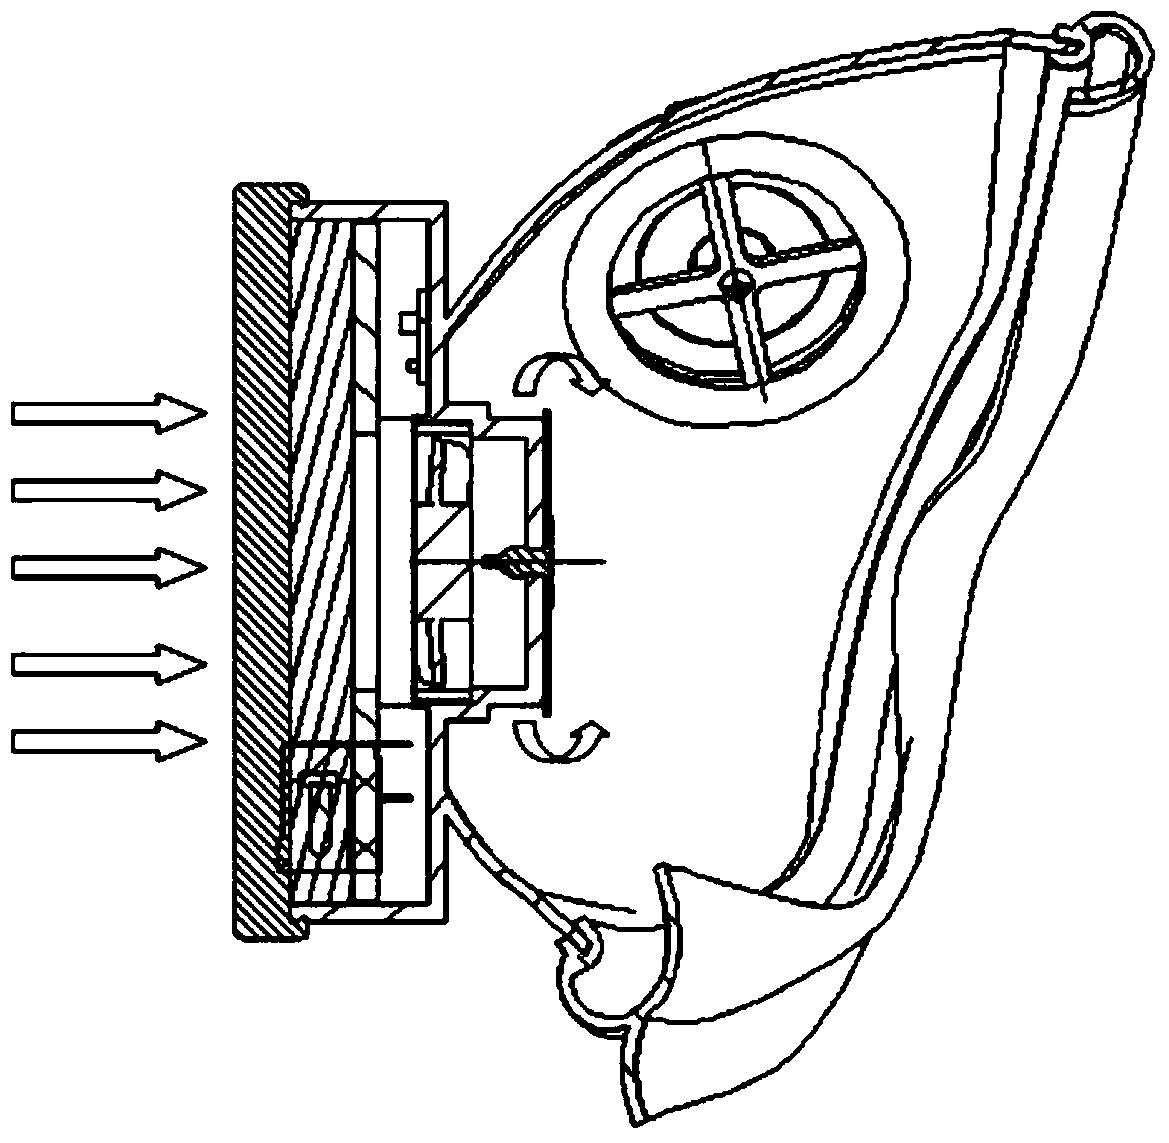 Air filter mask with built-in breathing valve and fan